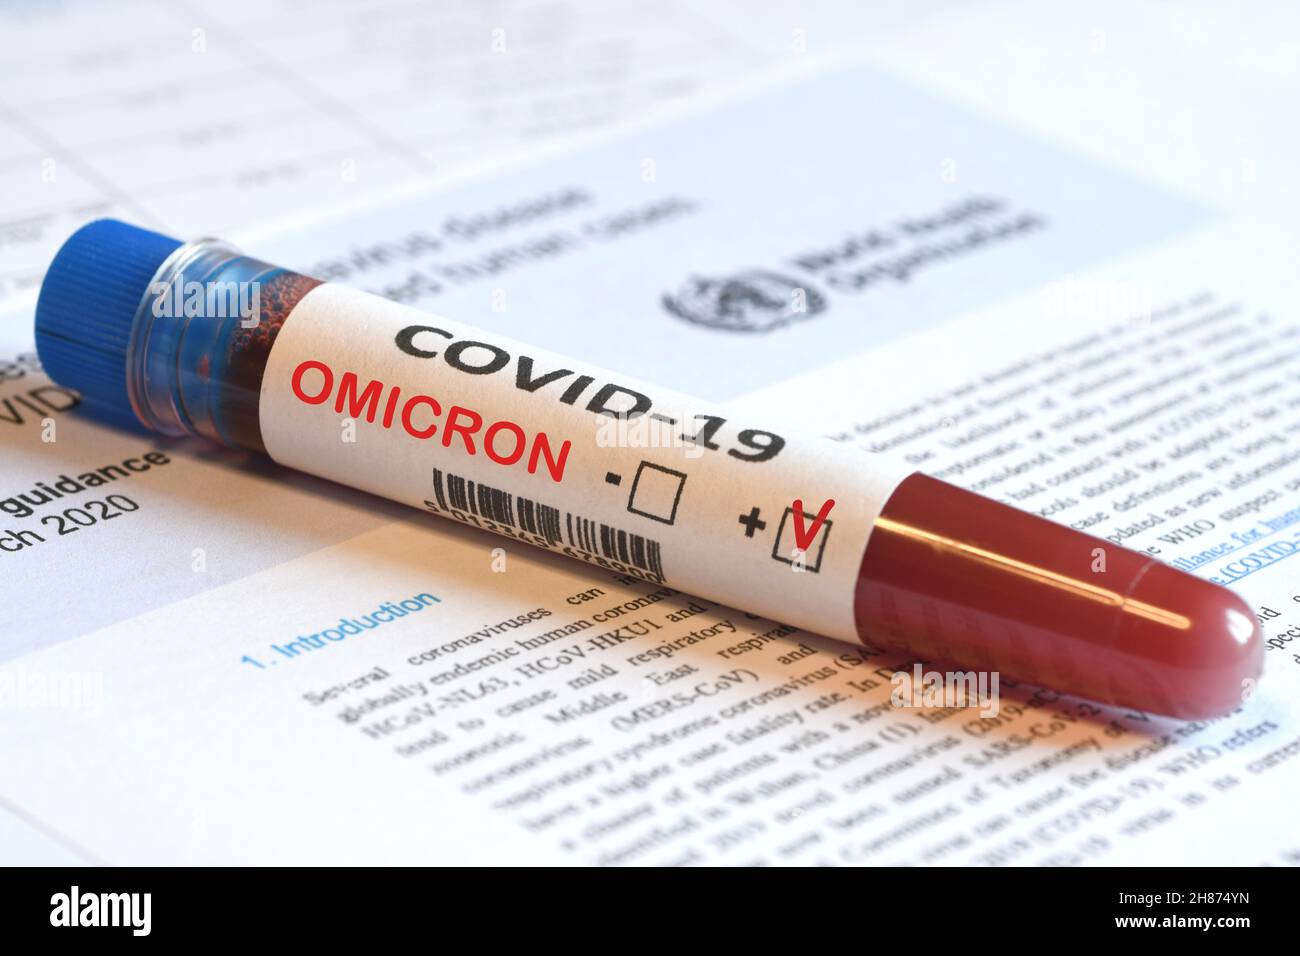 Blood tube for test detection of virus Covid-19 Omicron Variant with positive result on papers document. Stock Photo